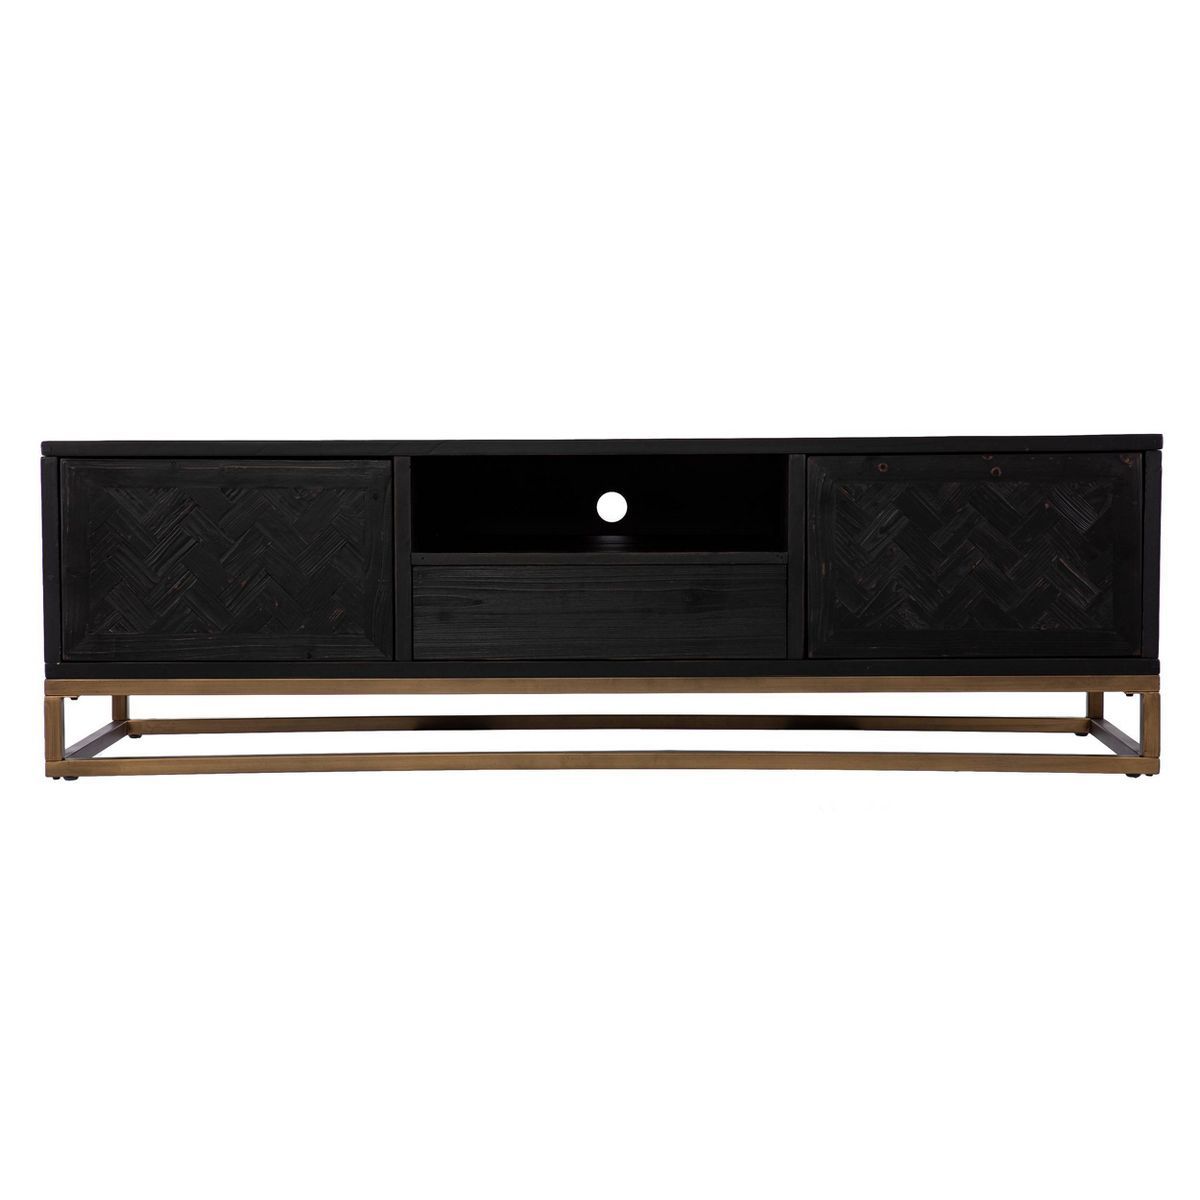 Dogafte Reclaimed Wood TV Stand for TVs up to 63" Black - Aiden Lane | Target